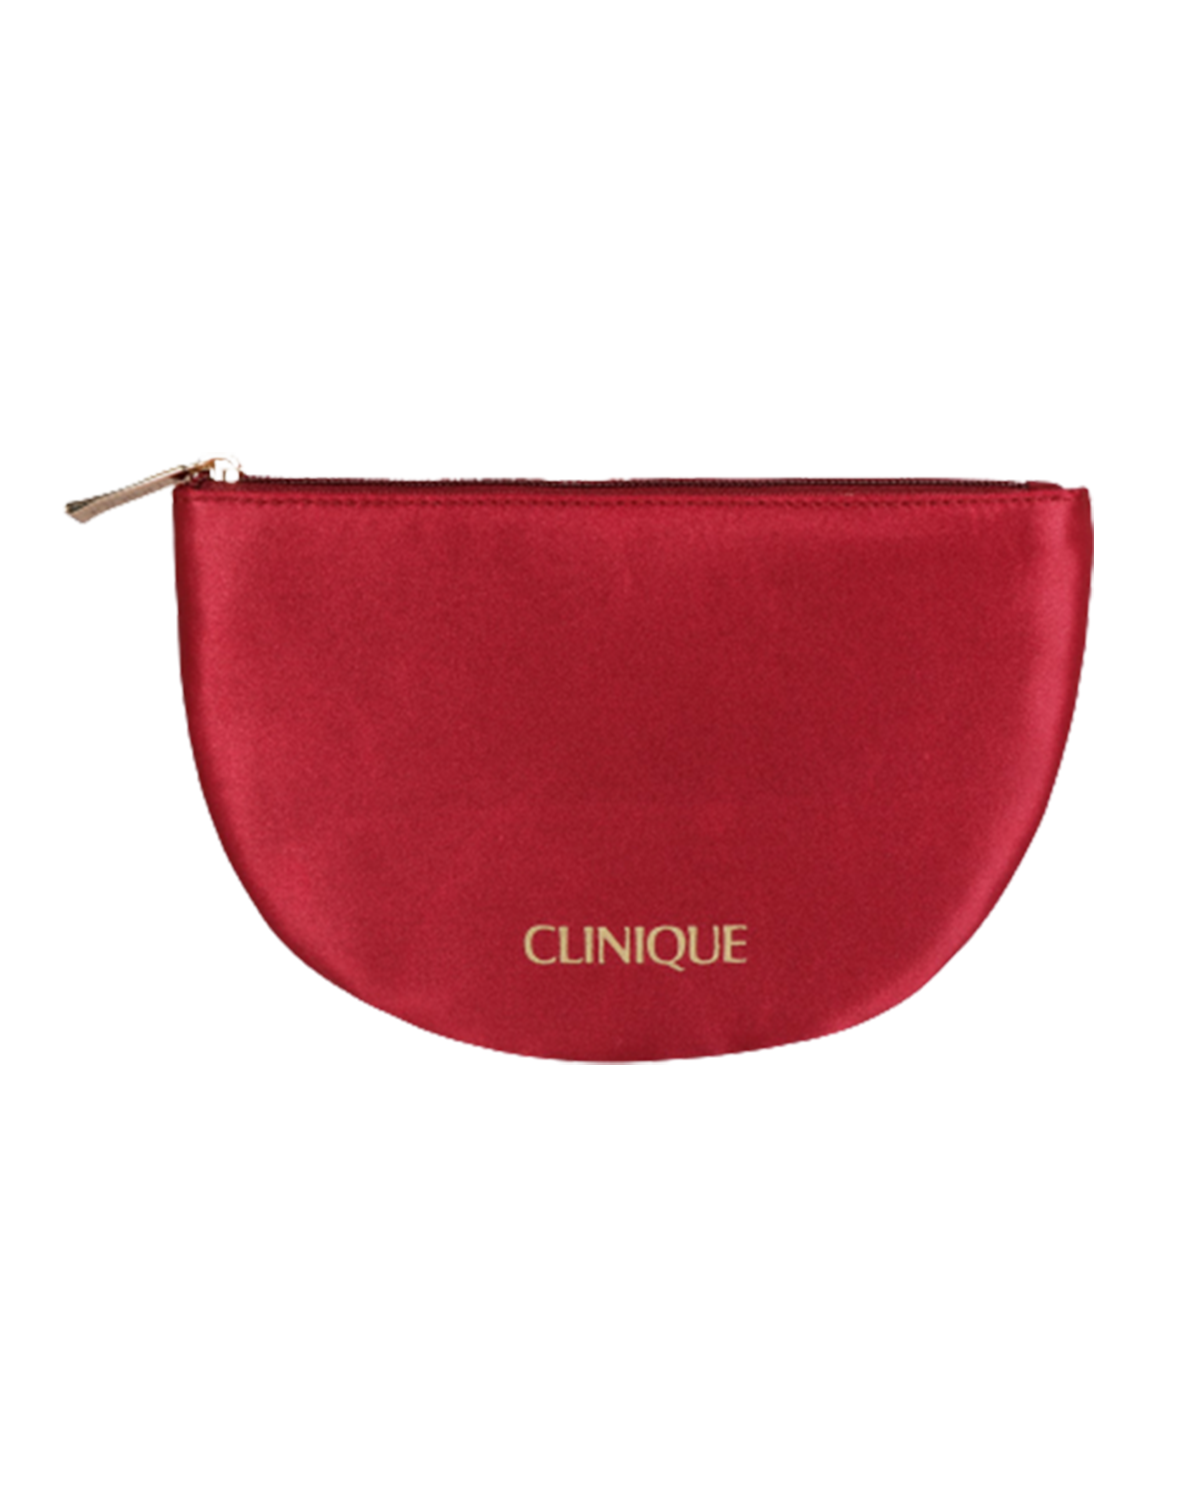 Clinique's Red Satin Pouch